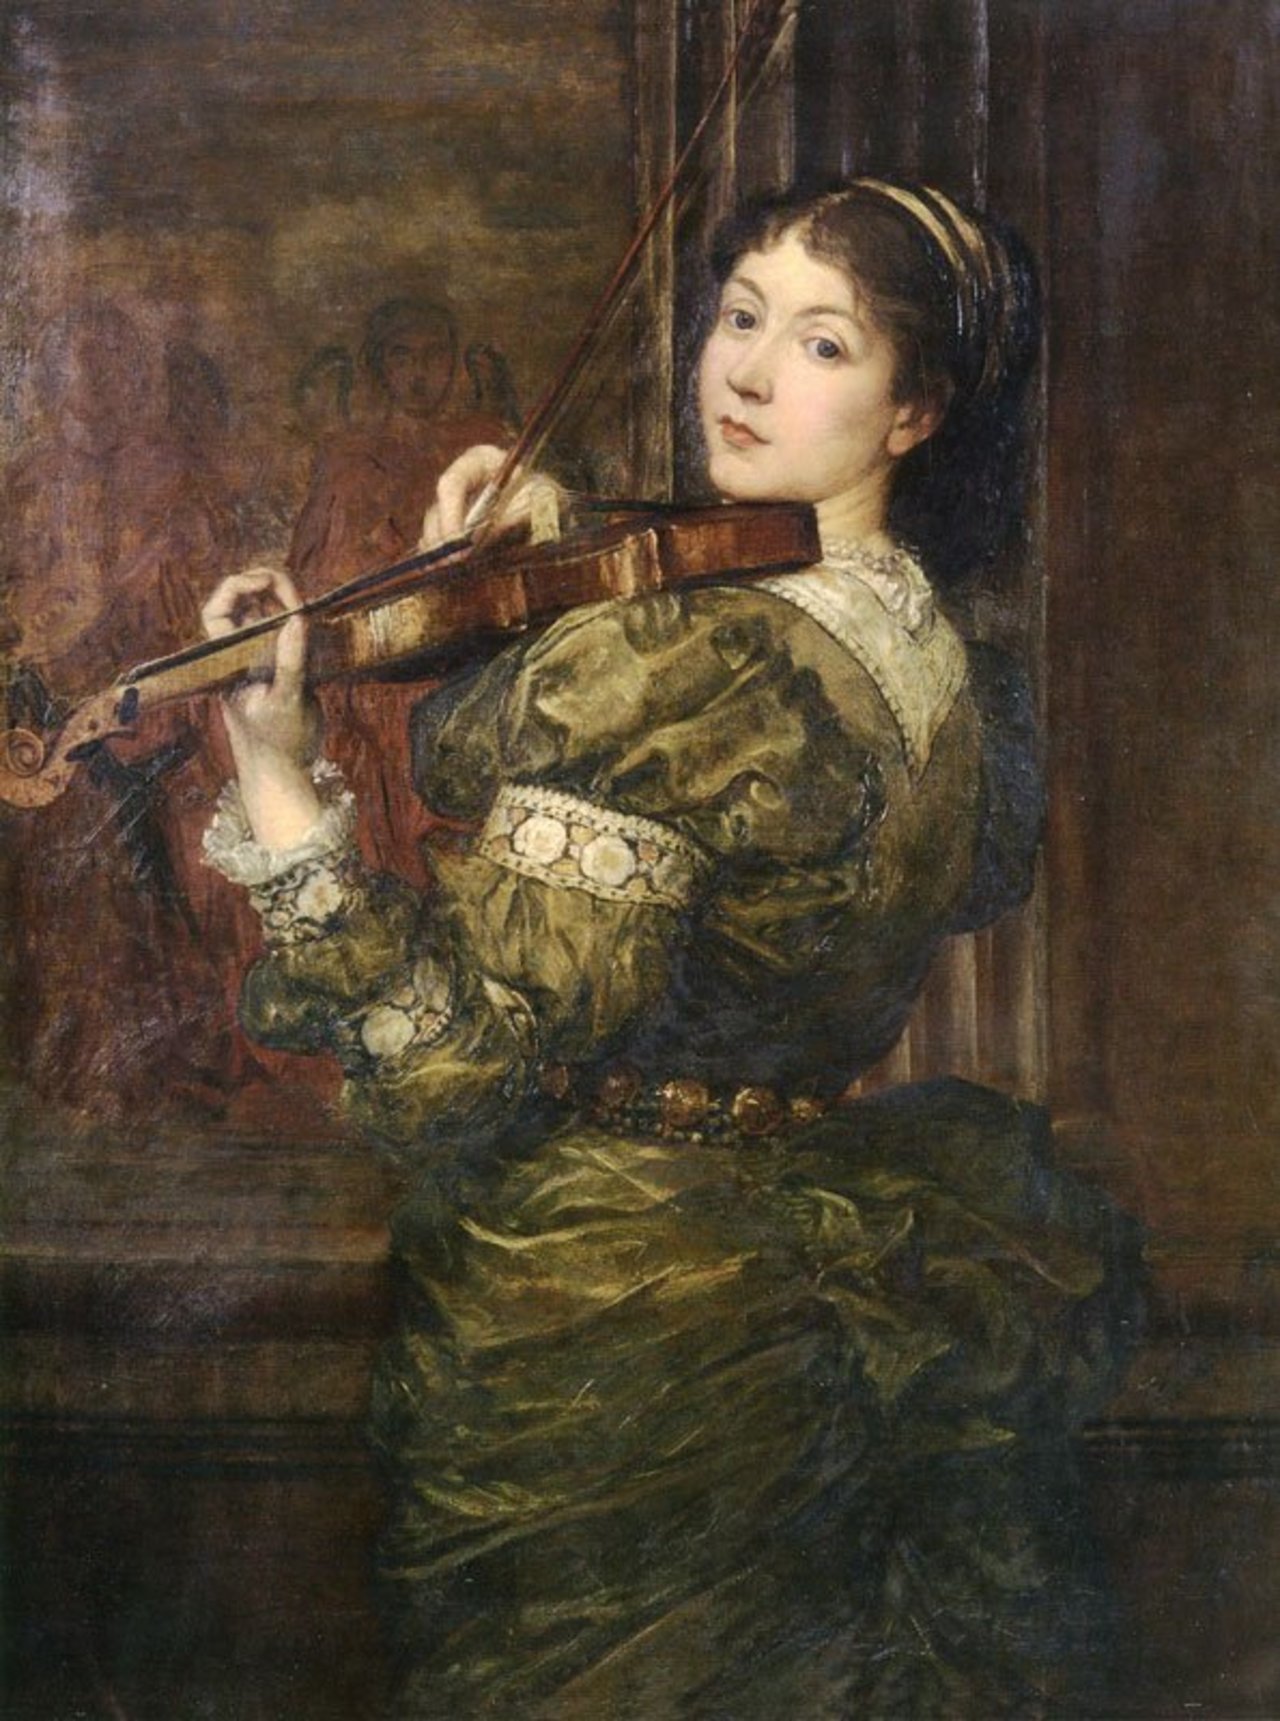 RT @marcelcel3: 'Portrait of Blanche, Lady Lindsay'George Frederick Wattshttps://www.youtube.com/watch?feature=player_detailpage&v=N4oMm1id9Bc https://t.co/LUnS1dQXSZ